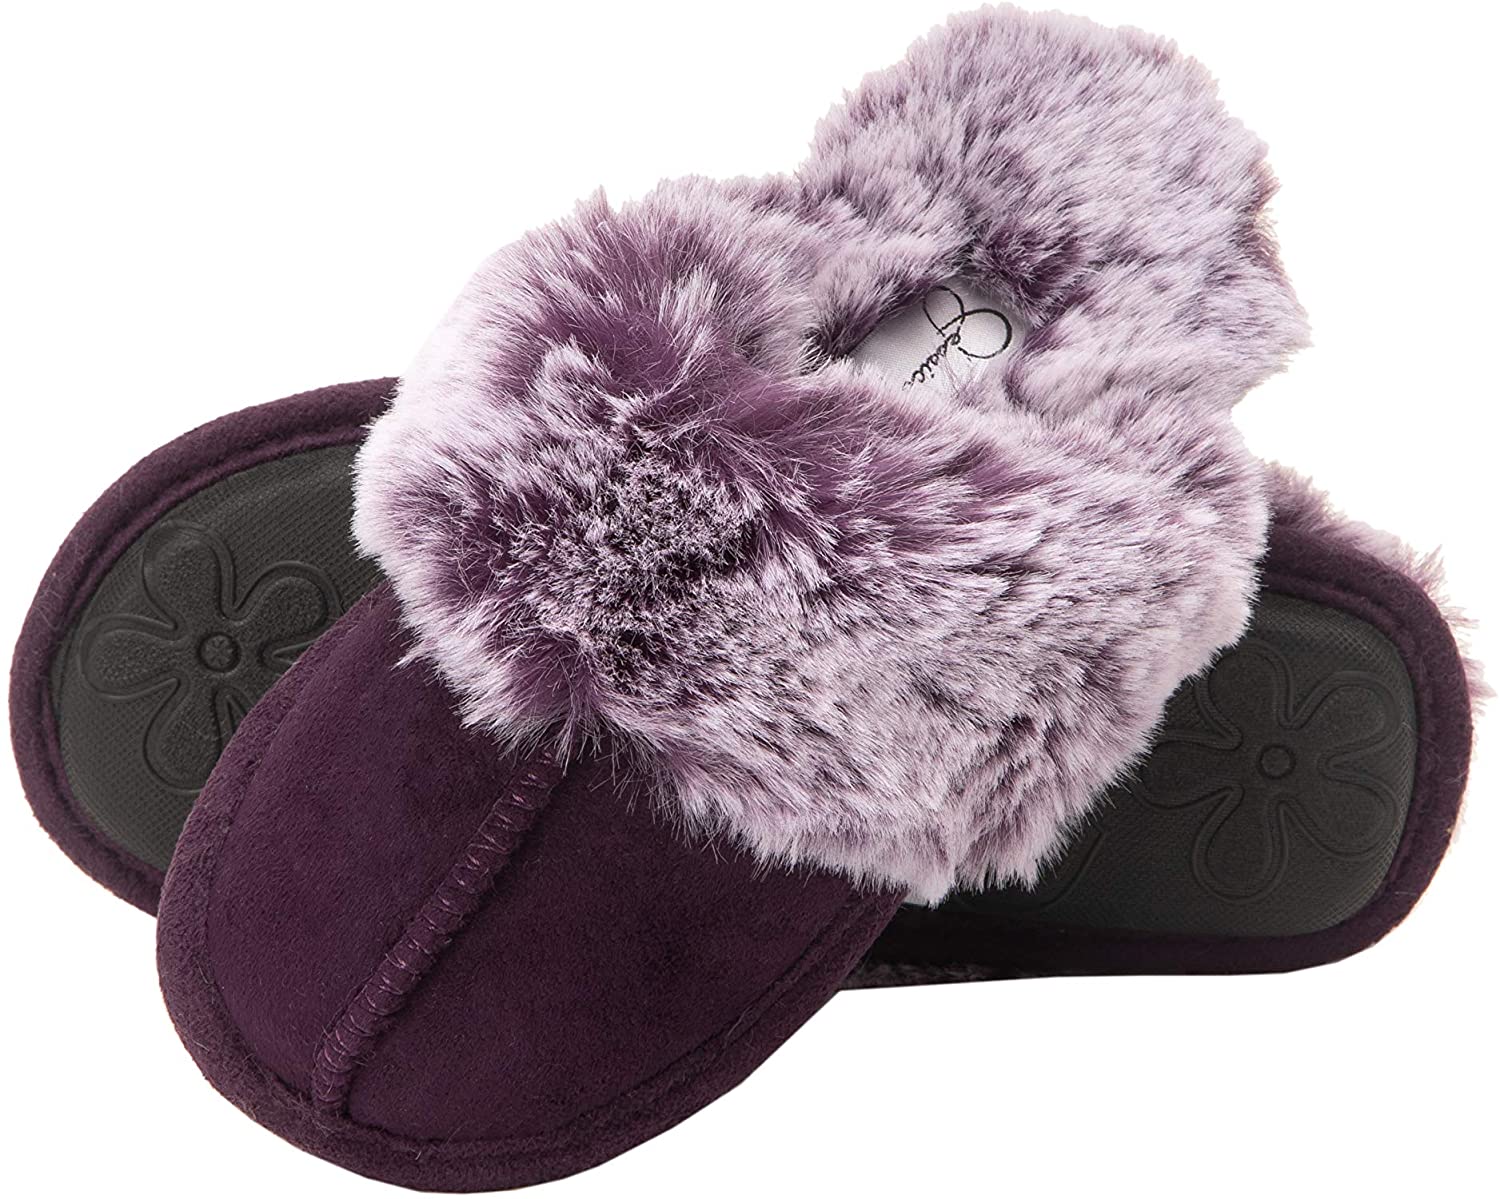 Jessica Simpson Girls Comfy Slippers